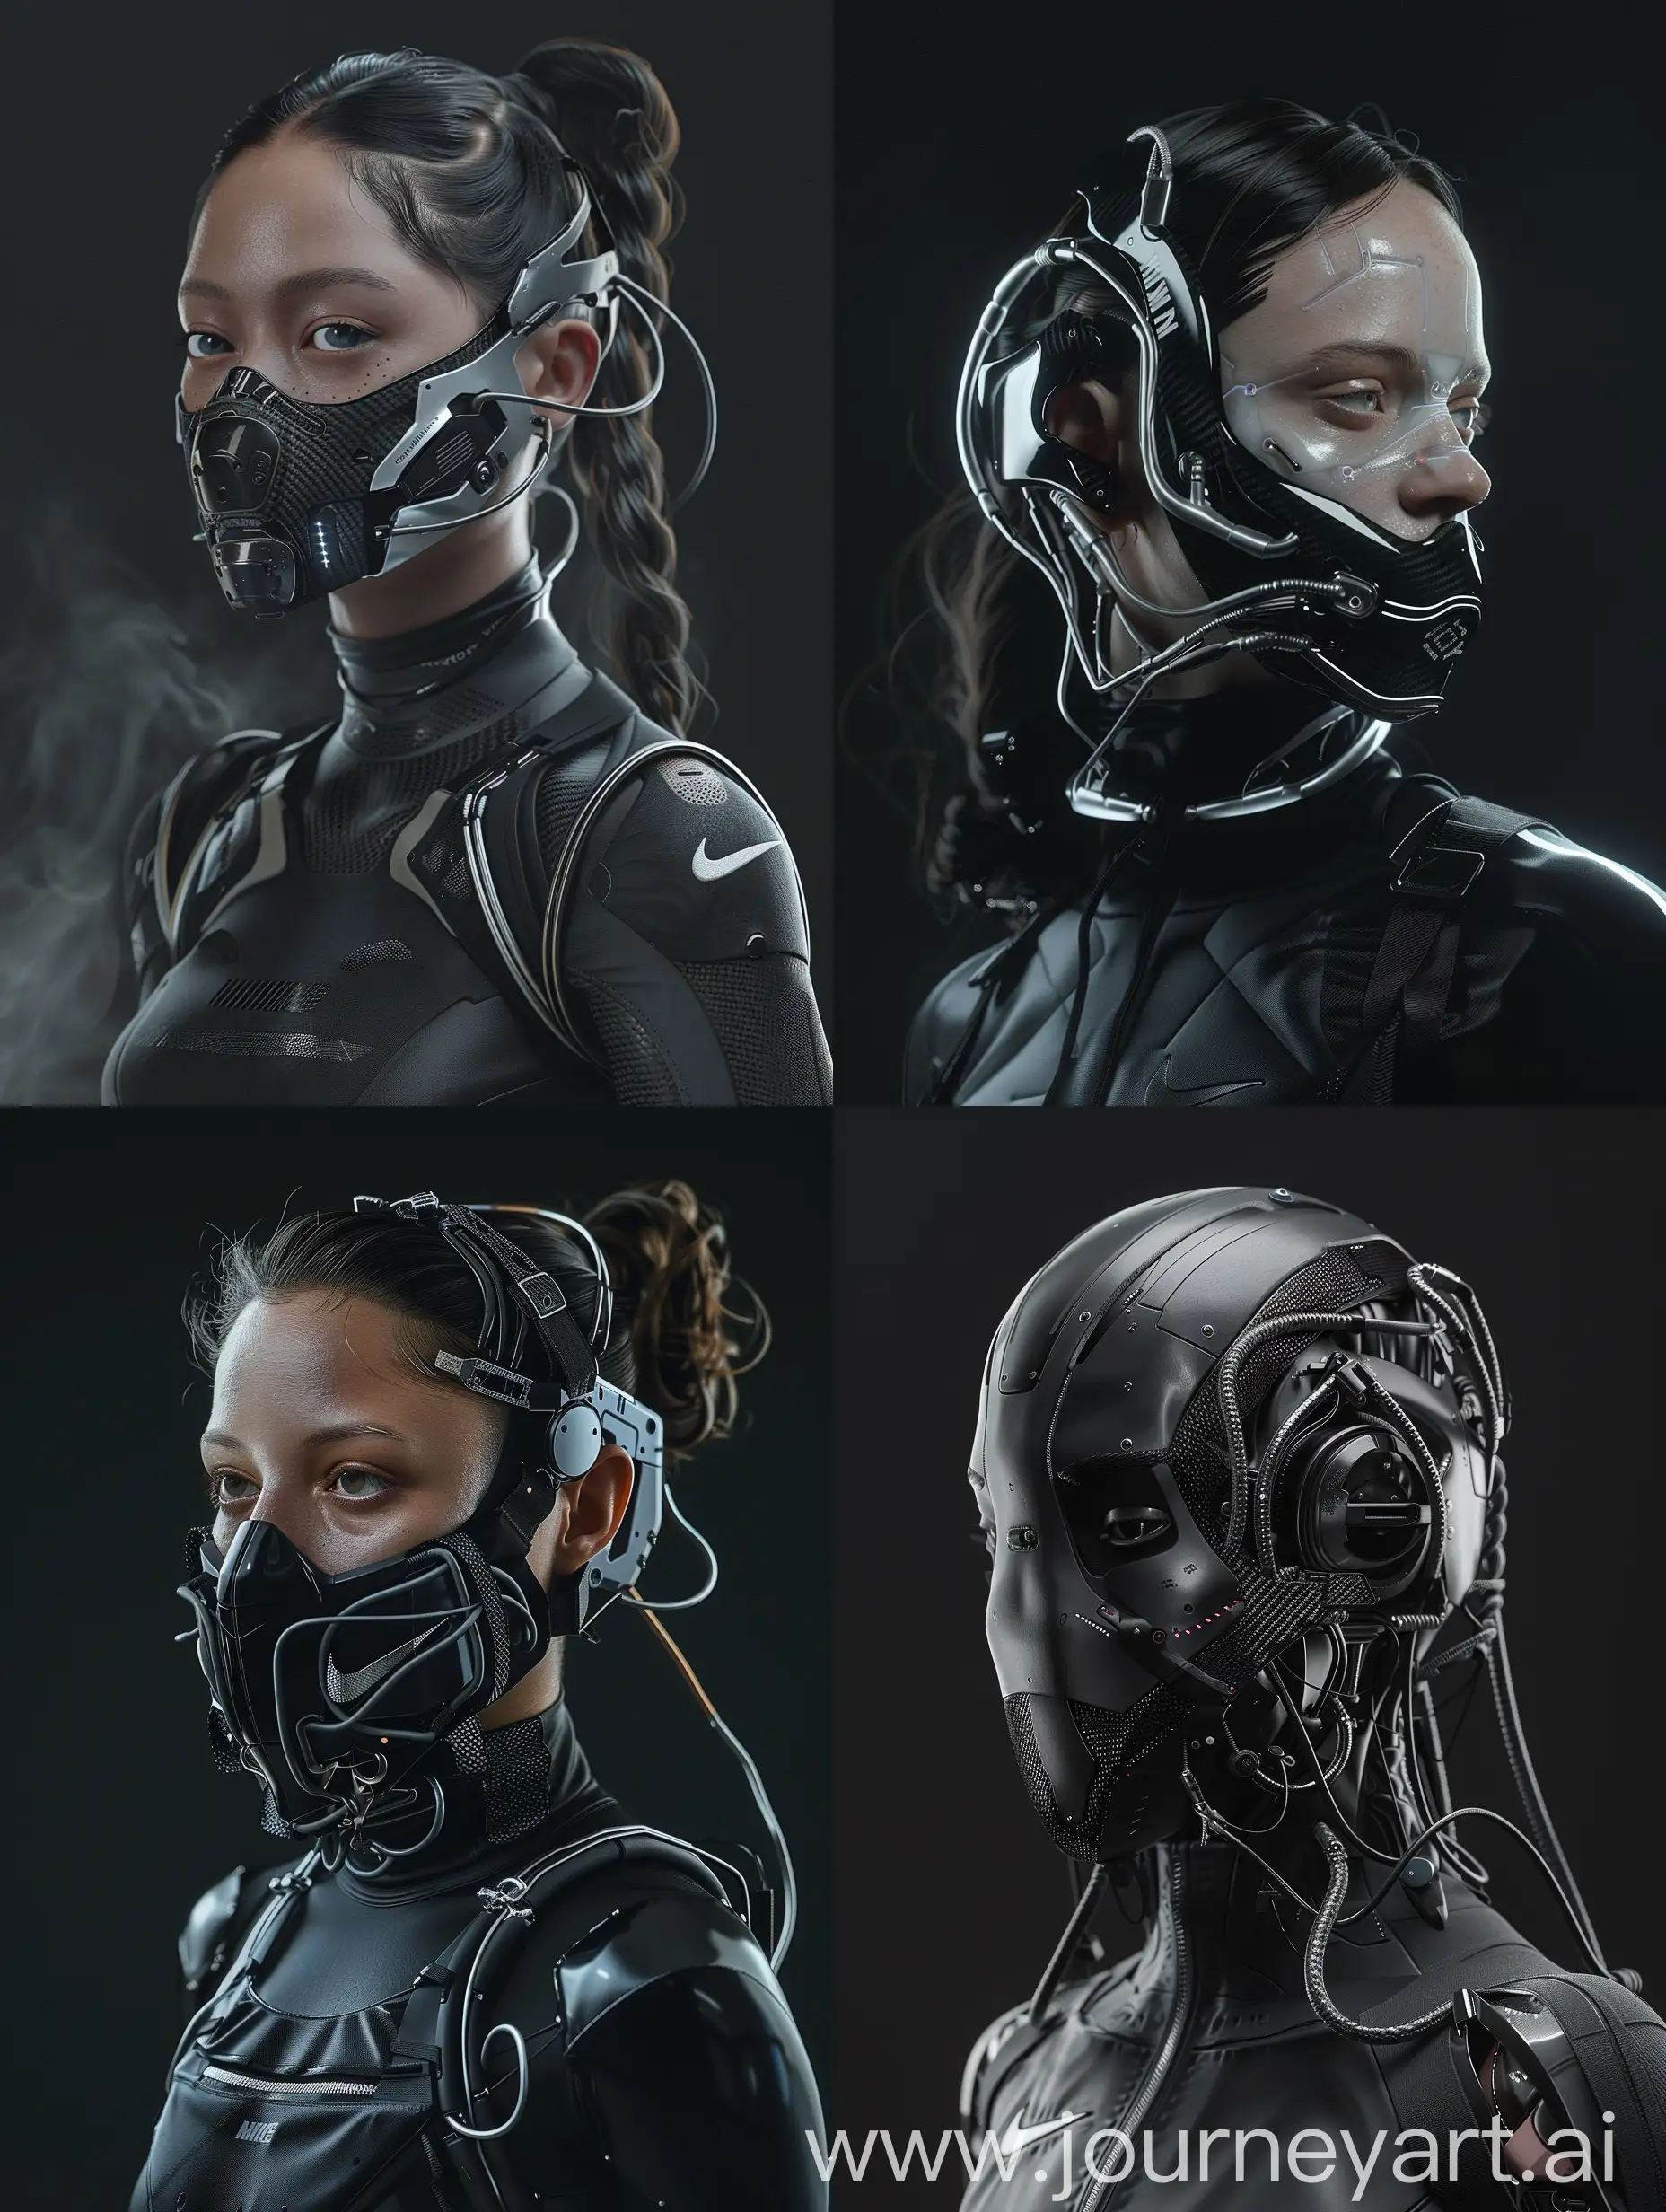 Against a sleek black backdrop, behold a mesmerizing character adorned with a cybernetic mouth-covering mask. It seamlessly blends cutting-edge technology with intricate details, boasting carbon fiber textures, sleek aluminum accents, and wires. Symbolizing the delicate balance between humanity and machine, her appearance embodies the essence of a futuristic cyberpunk aesthetic, enhanced with Nike-inspired add-ons. With dynamic movements reminiscent of action film sequences and cinematic haze, her presence captivates with its irresistible allure.v1